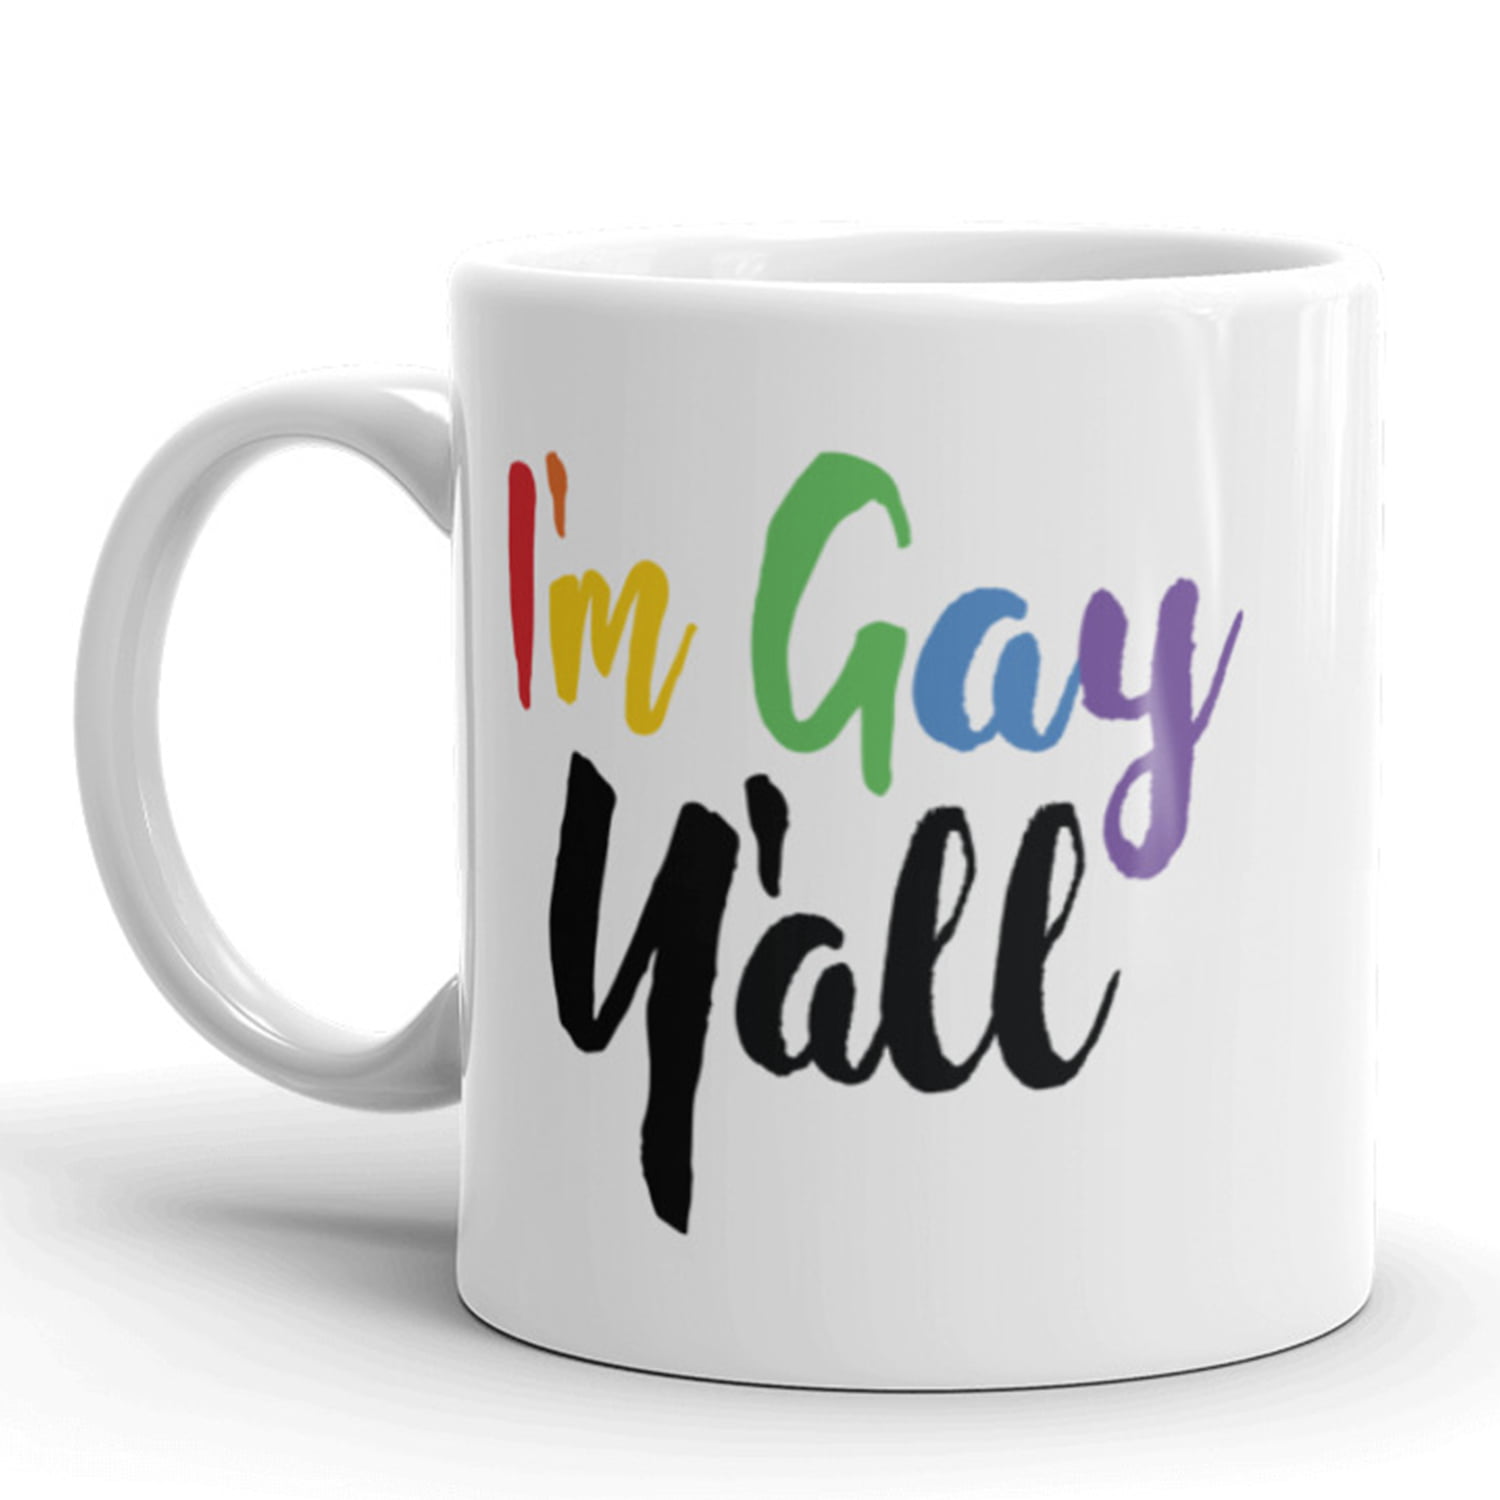 Straight Outta the Closet printed Coffee Mug for Gay